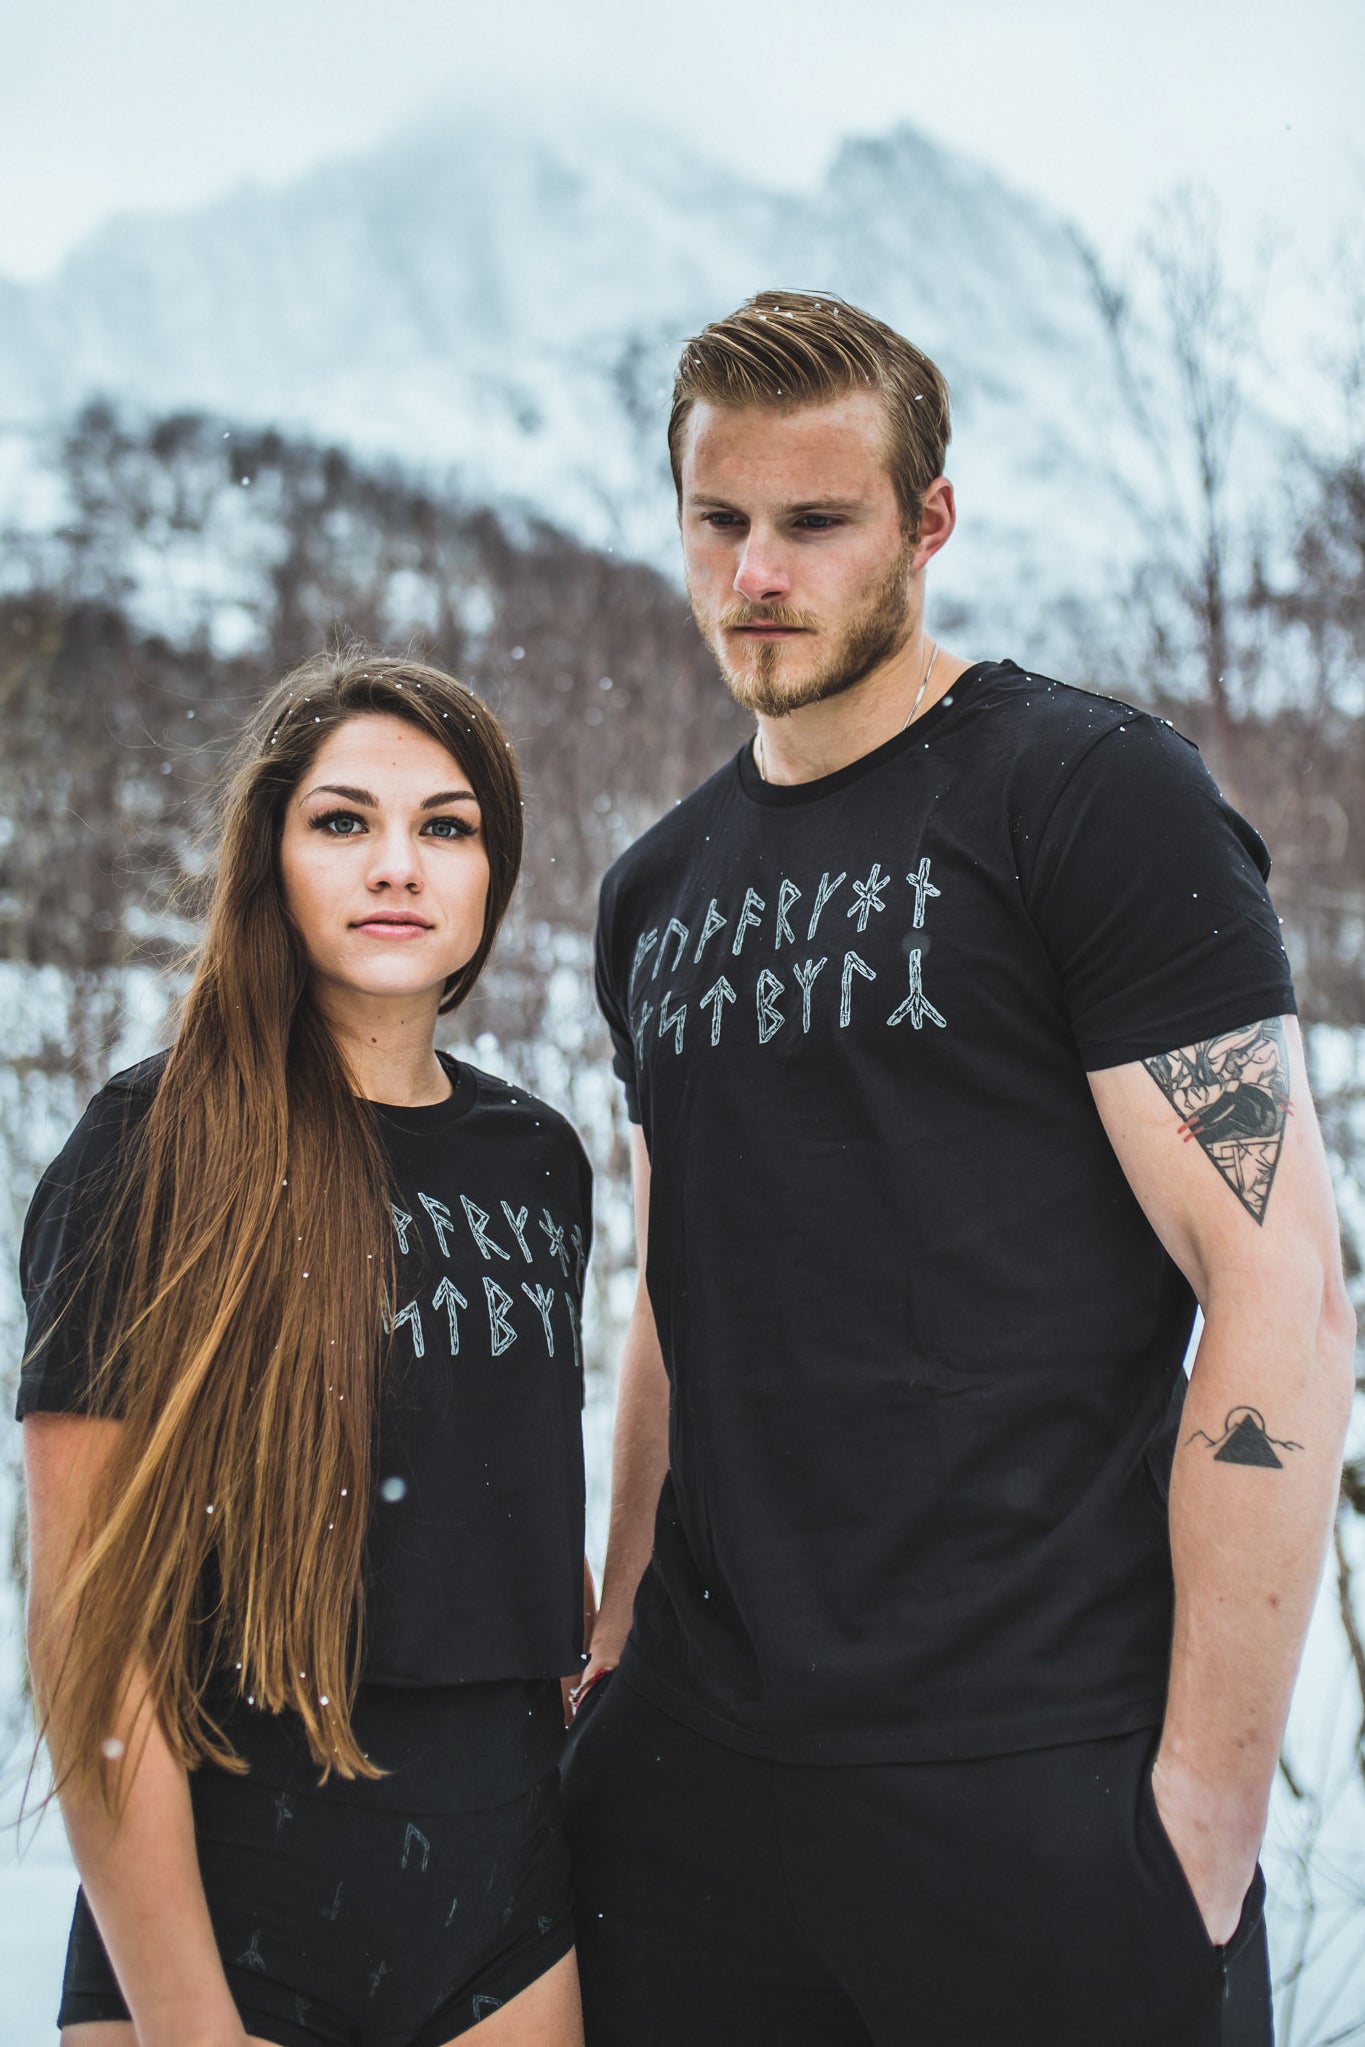 Descended from Odin, Organic T-shirts, Staithes Hoodie, Merino Wool Hoodie, Odin, TYR, Thor, Ragnar, Bjorn Ironside, Vikings, Anglo Saxon, Norse, Fitness Gear, Horns, Jewellery, Silver, Alexander Ludwig